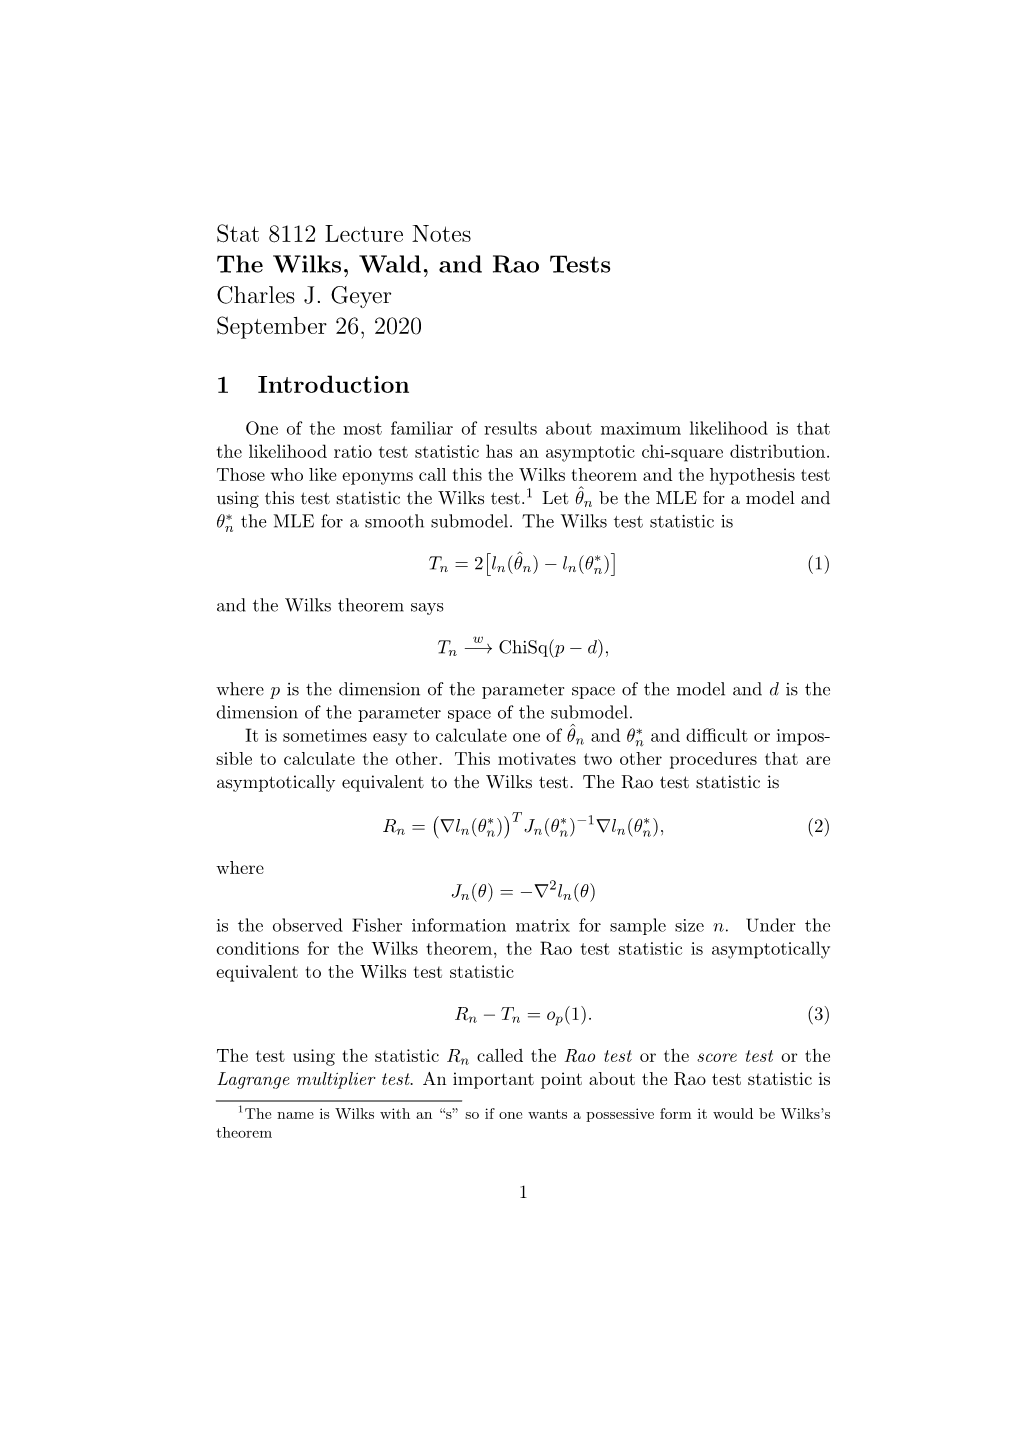 Stat 8112 Lecture Notes the Wilks, Wald, and Rao Tests Charles J